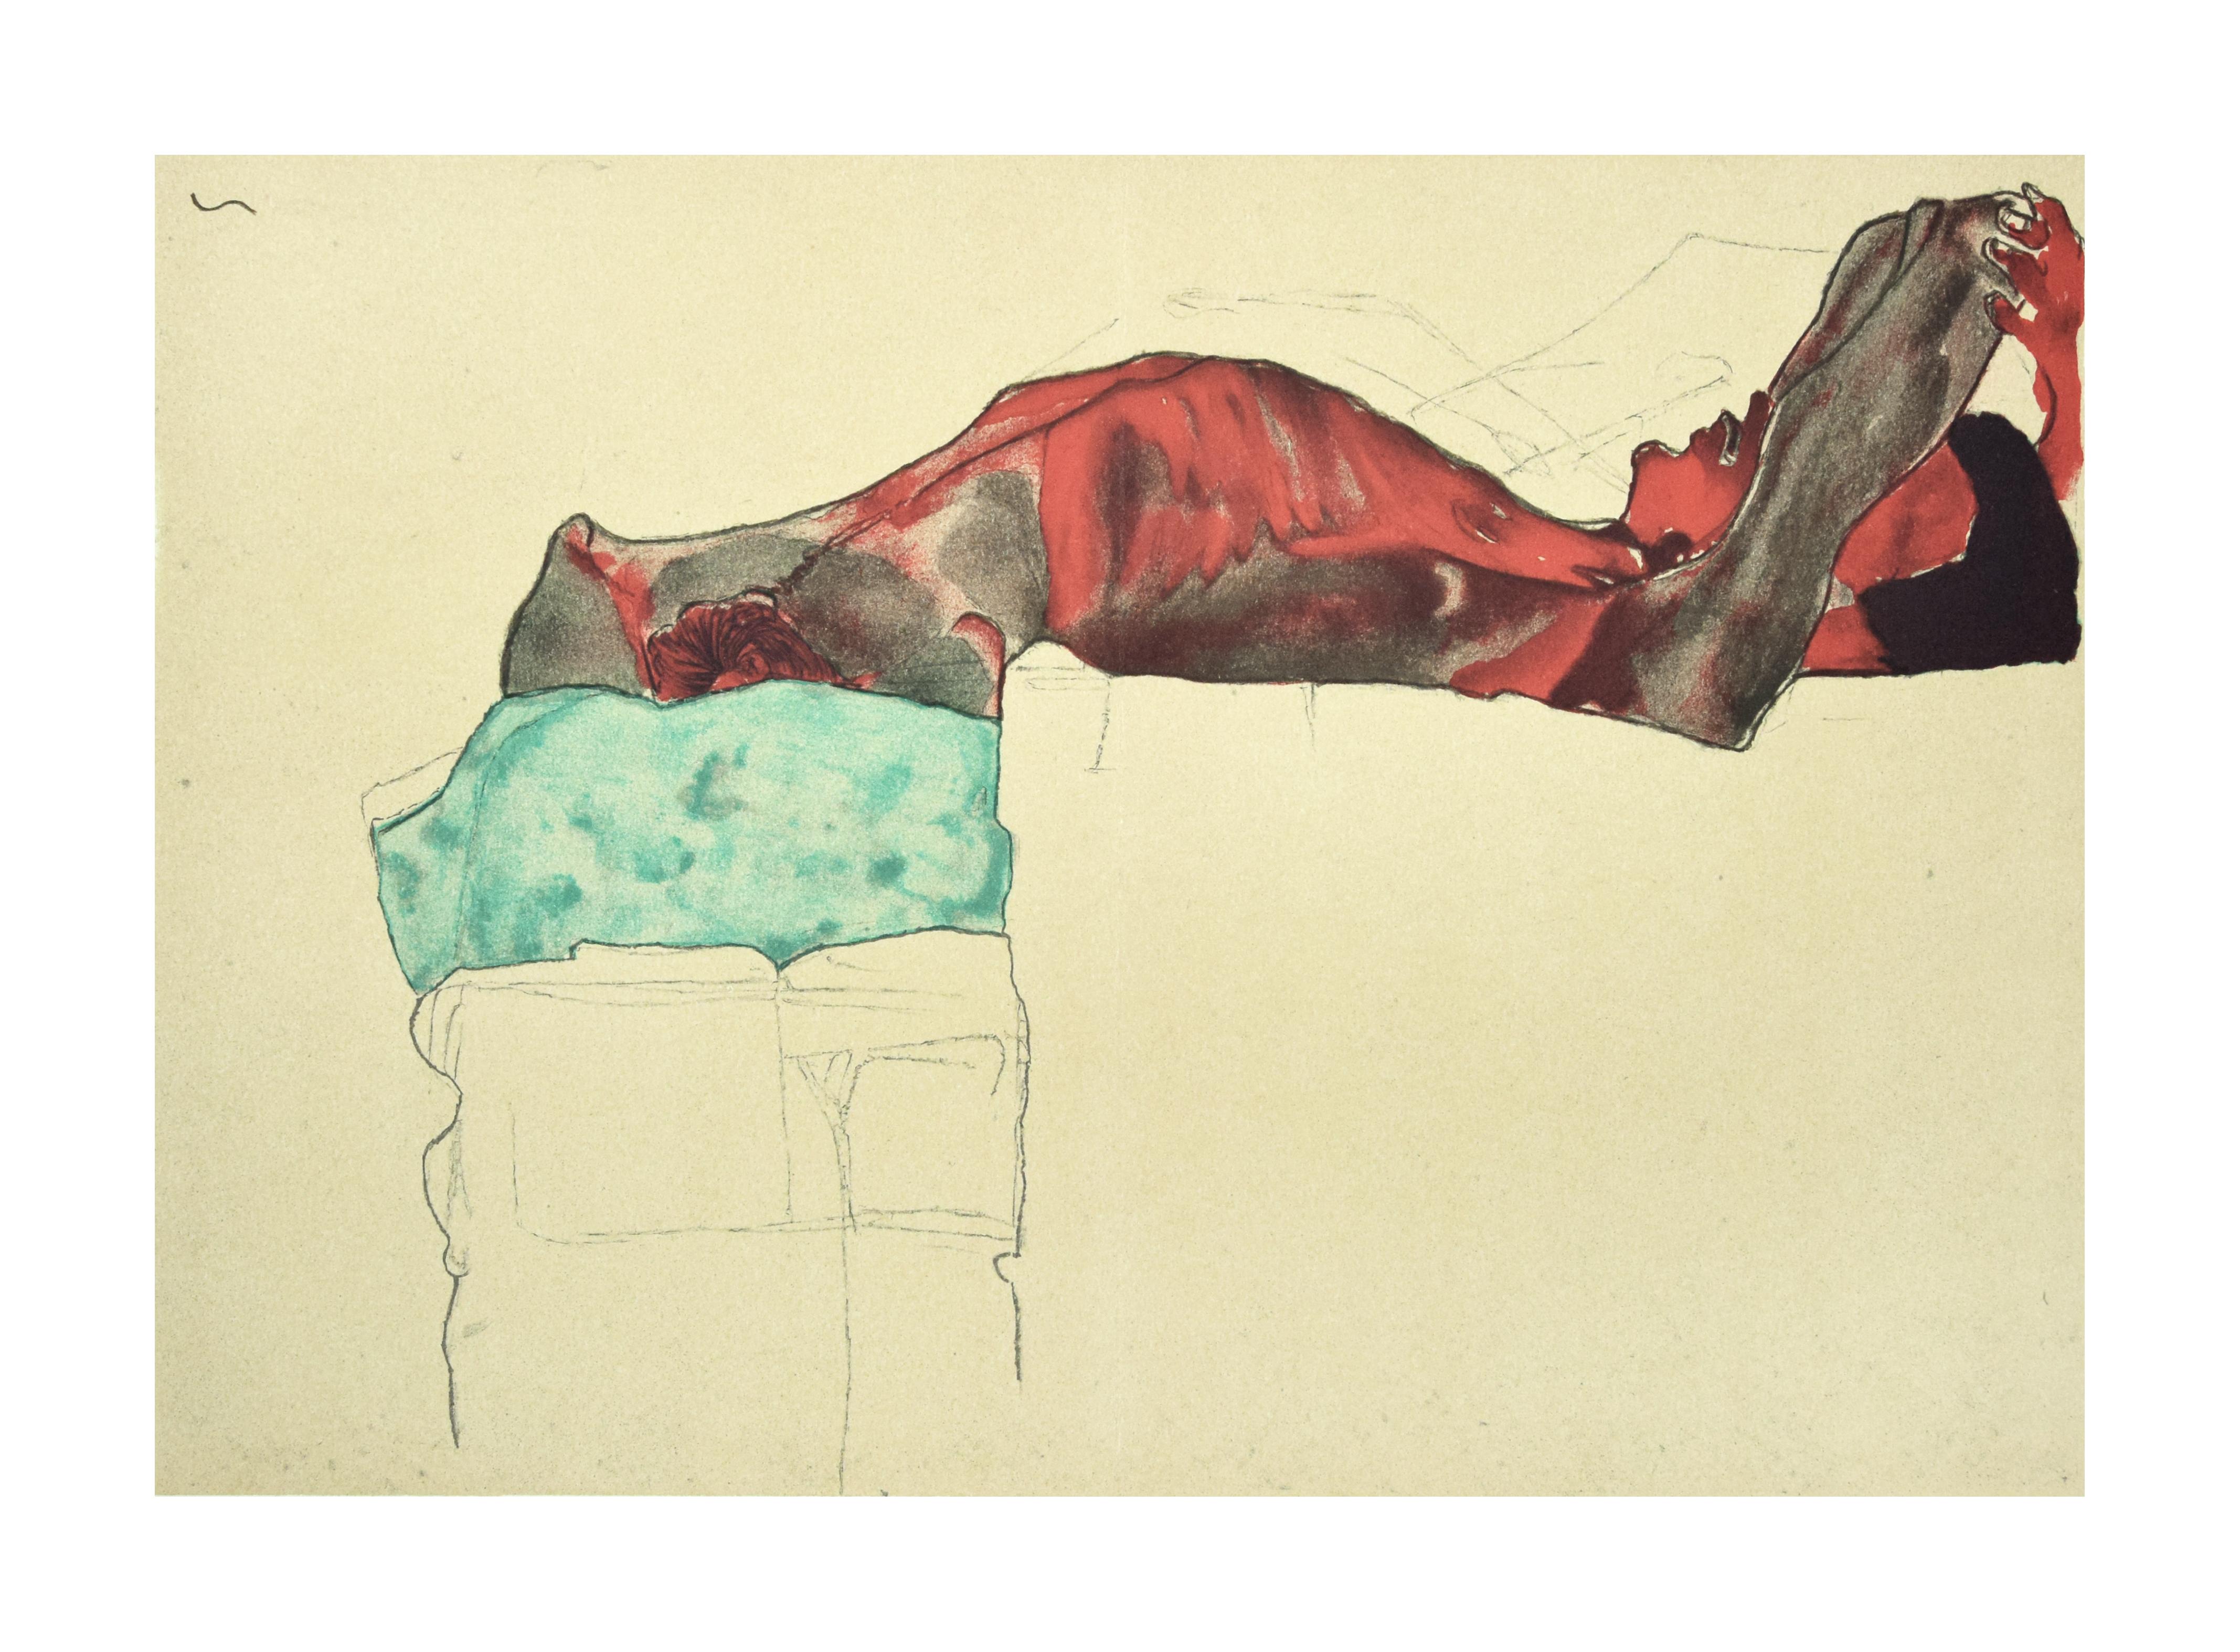 (after) Egon Schiele Nude Print - Reclining Male Reclining Male Nude with  - 2000s - Lithograph After Egon Schiele